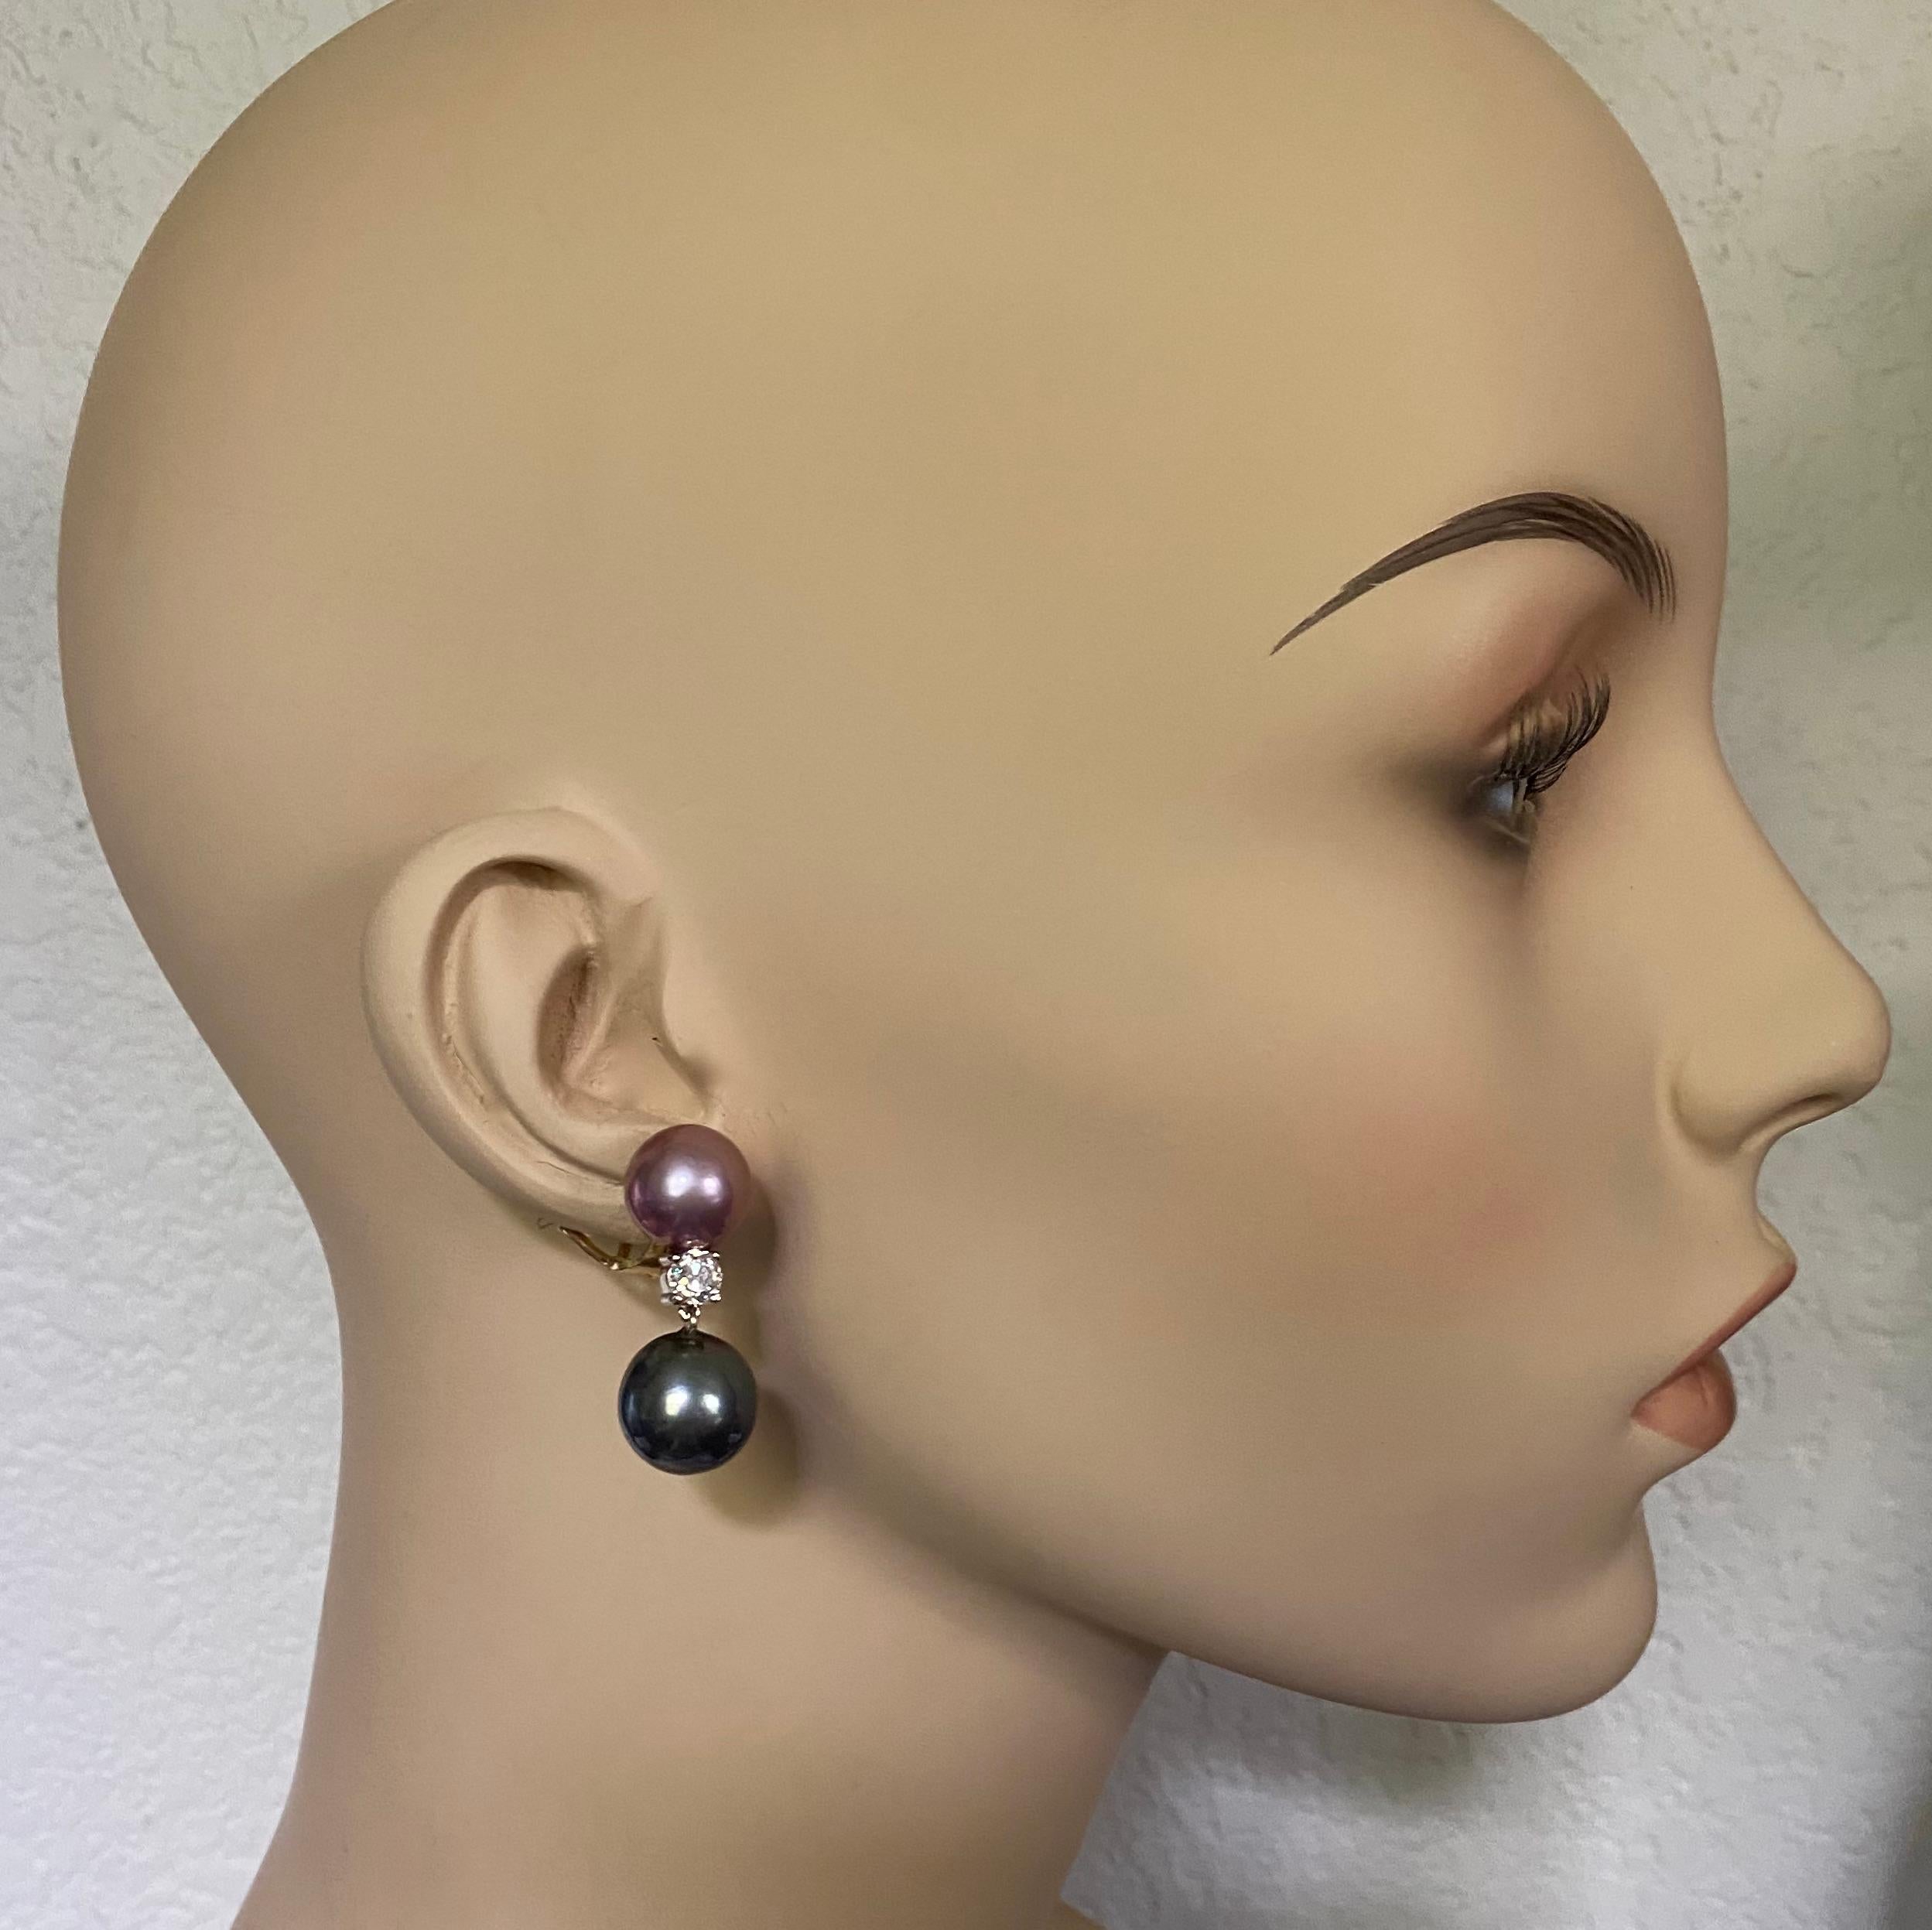 Tahitian and South Seas pearls combine to form these sophisticated dangle earrings.  The pearls measure 12mm and 14mm respectively and are in complementary  shades of pink, rose, dark gray and gold.  The pearls are all gem quality and possess